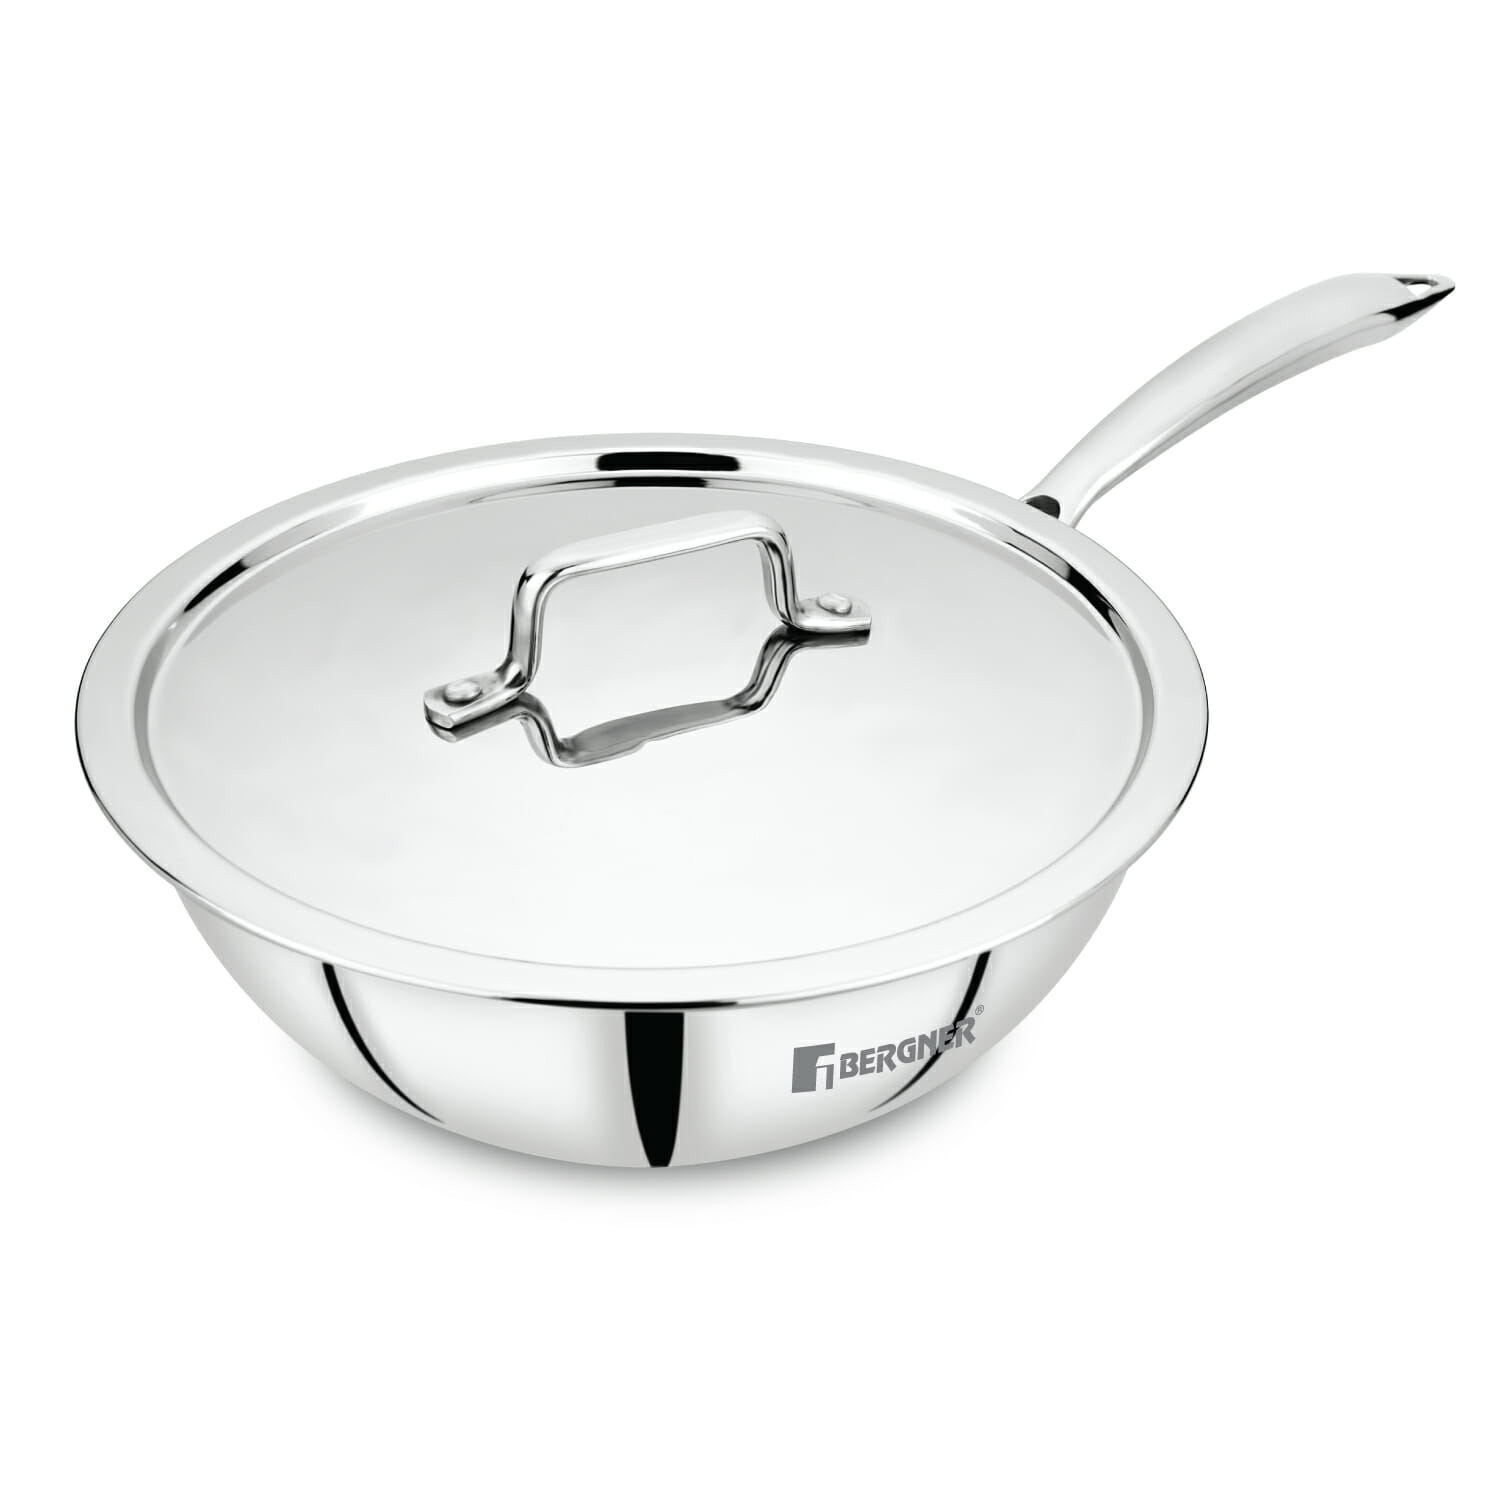 Bergner Tripro Triply Stainless Steel Induction Base Wok with 24 cm size and 2.5 Litre capacity